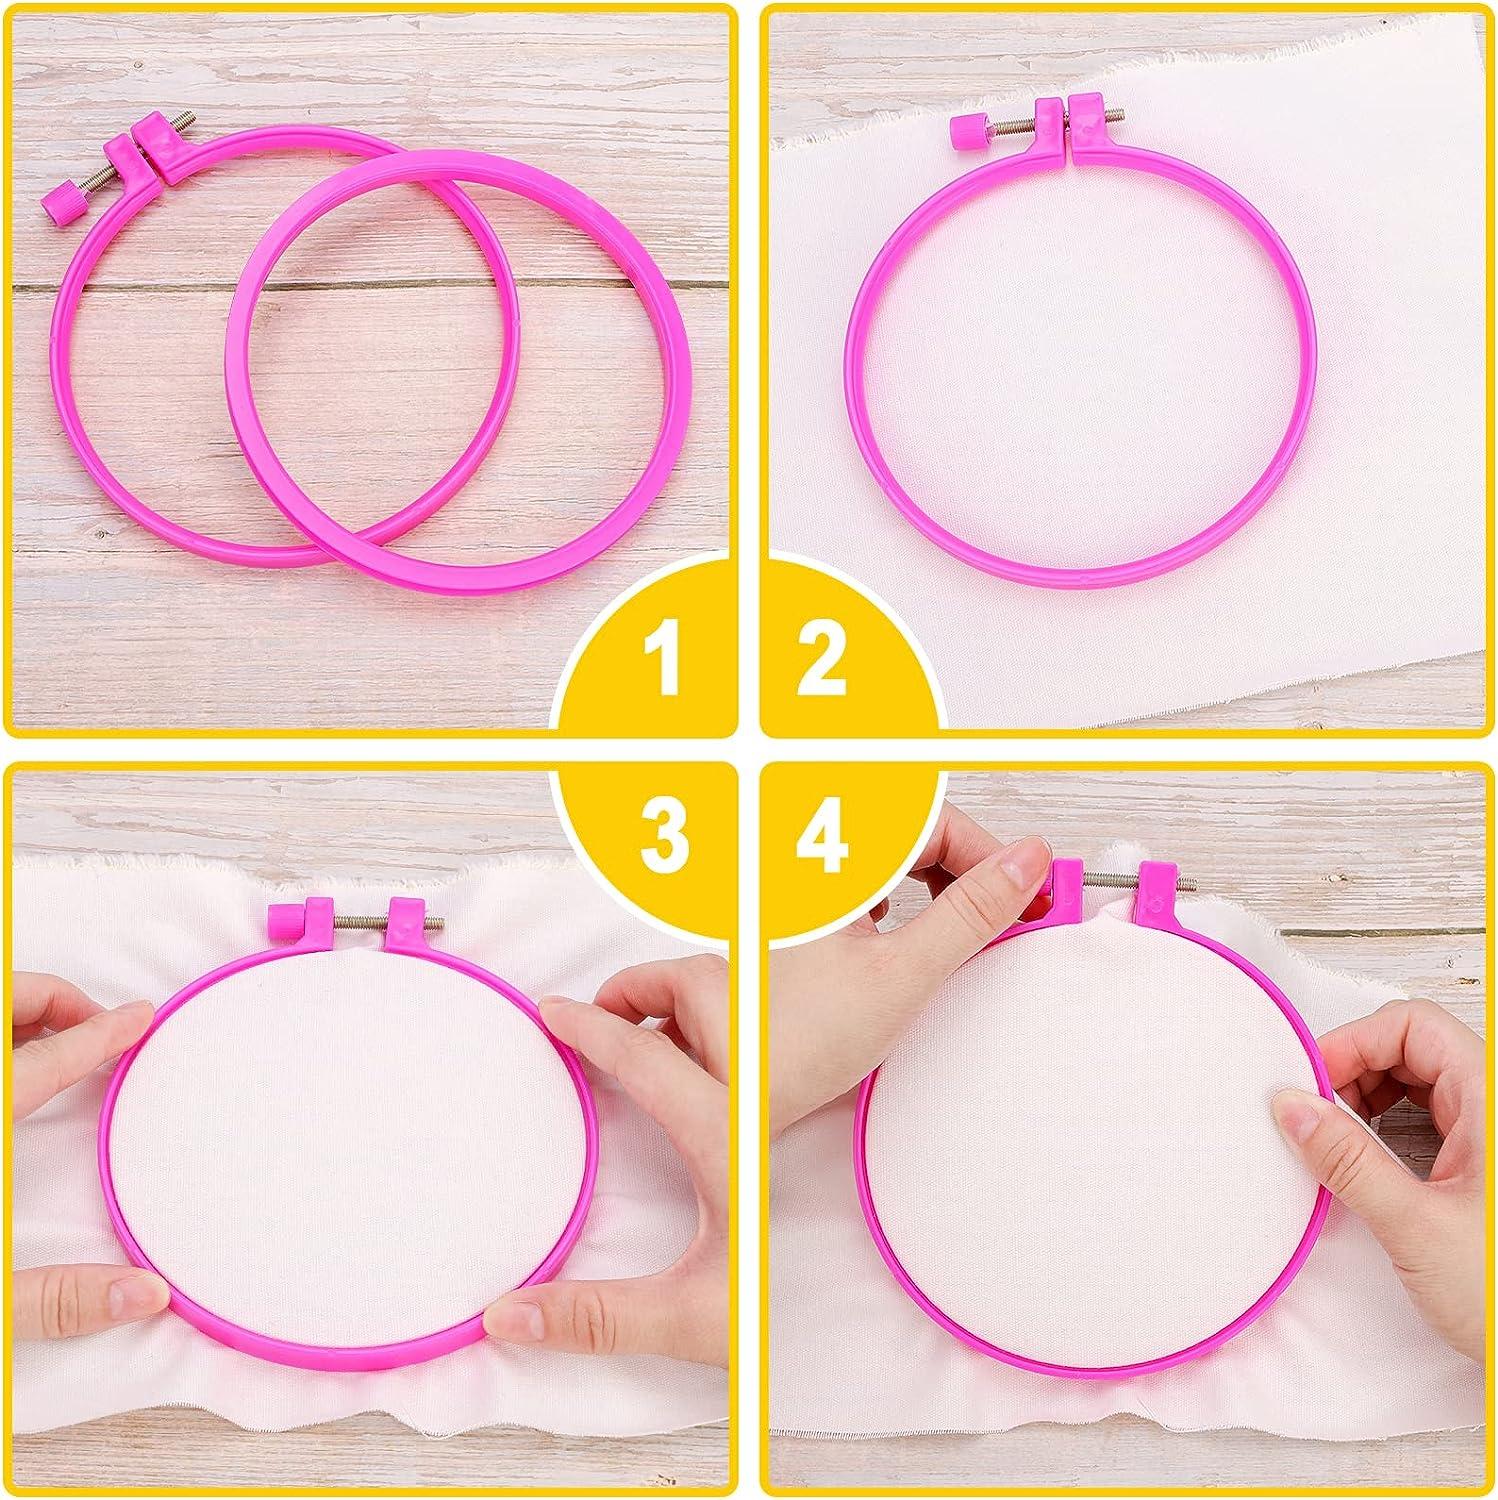 Caydo 7 Pieces Plastic Embroidery Hoops 2.3 inch to 10.2 inch